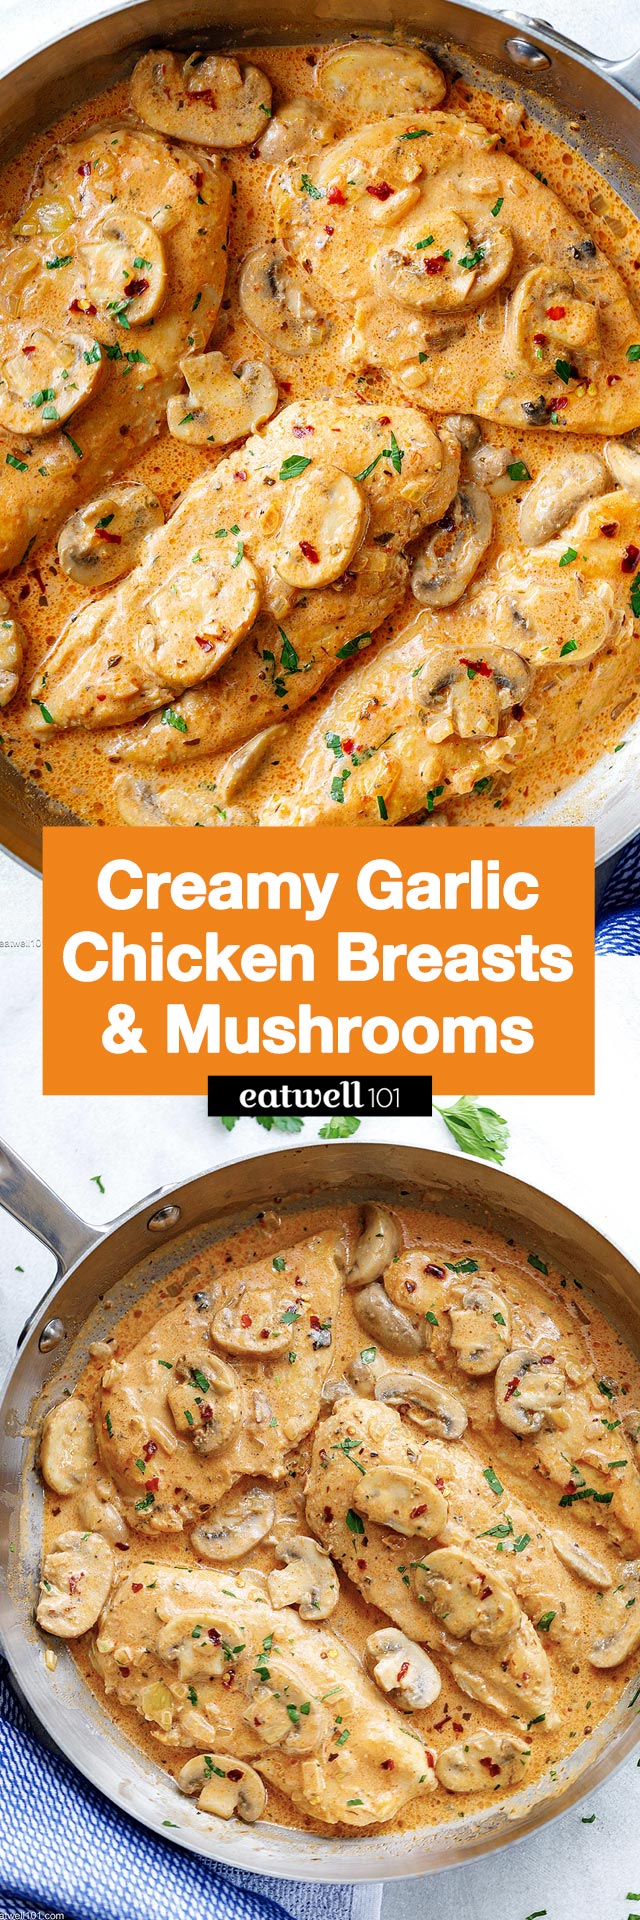 Creamy Garlic Parmesan Mushroom Chicken - #chicken #recipe #eatwell101 - Deliciously creamy and all made in one skillet, this easy one-pan chicken dish will wow your entire family for dinner! 